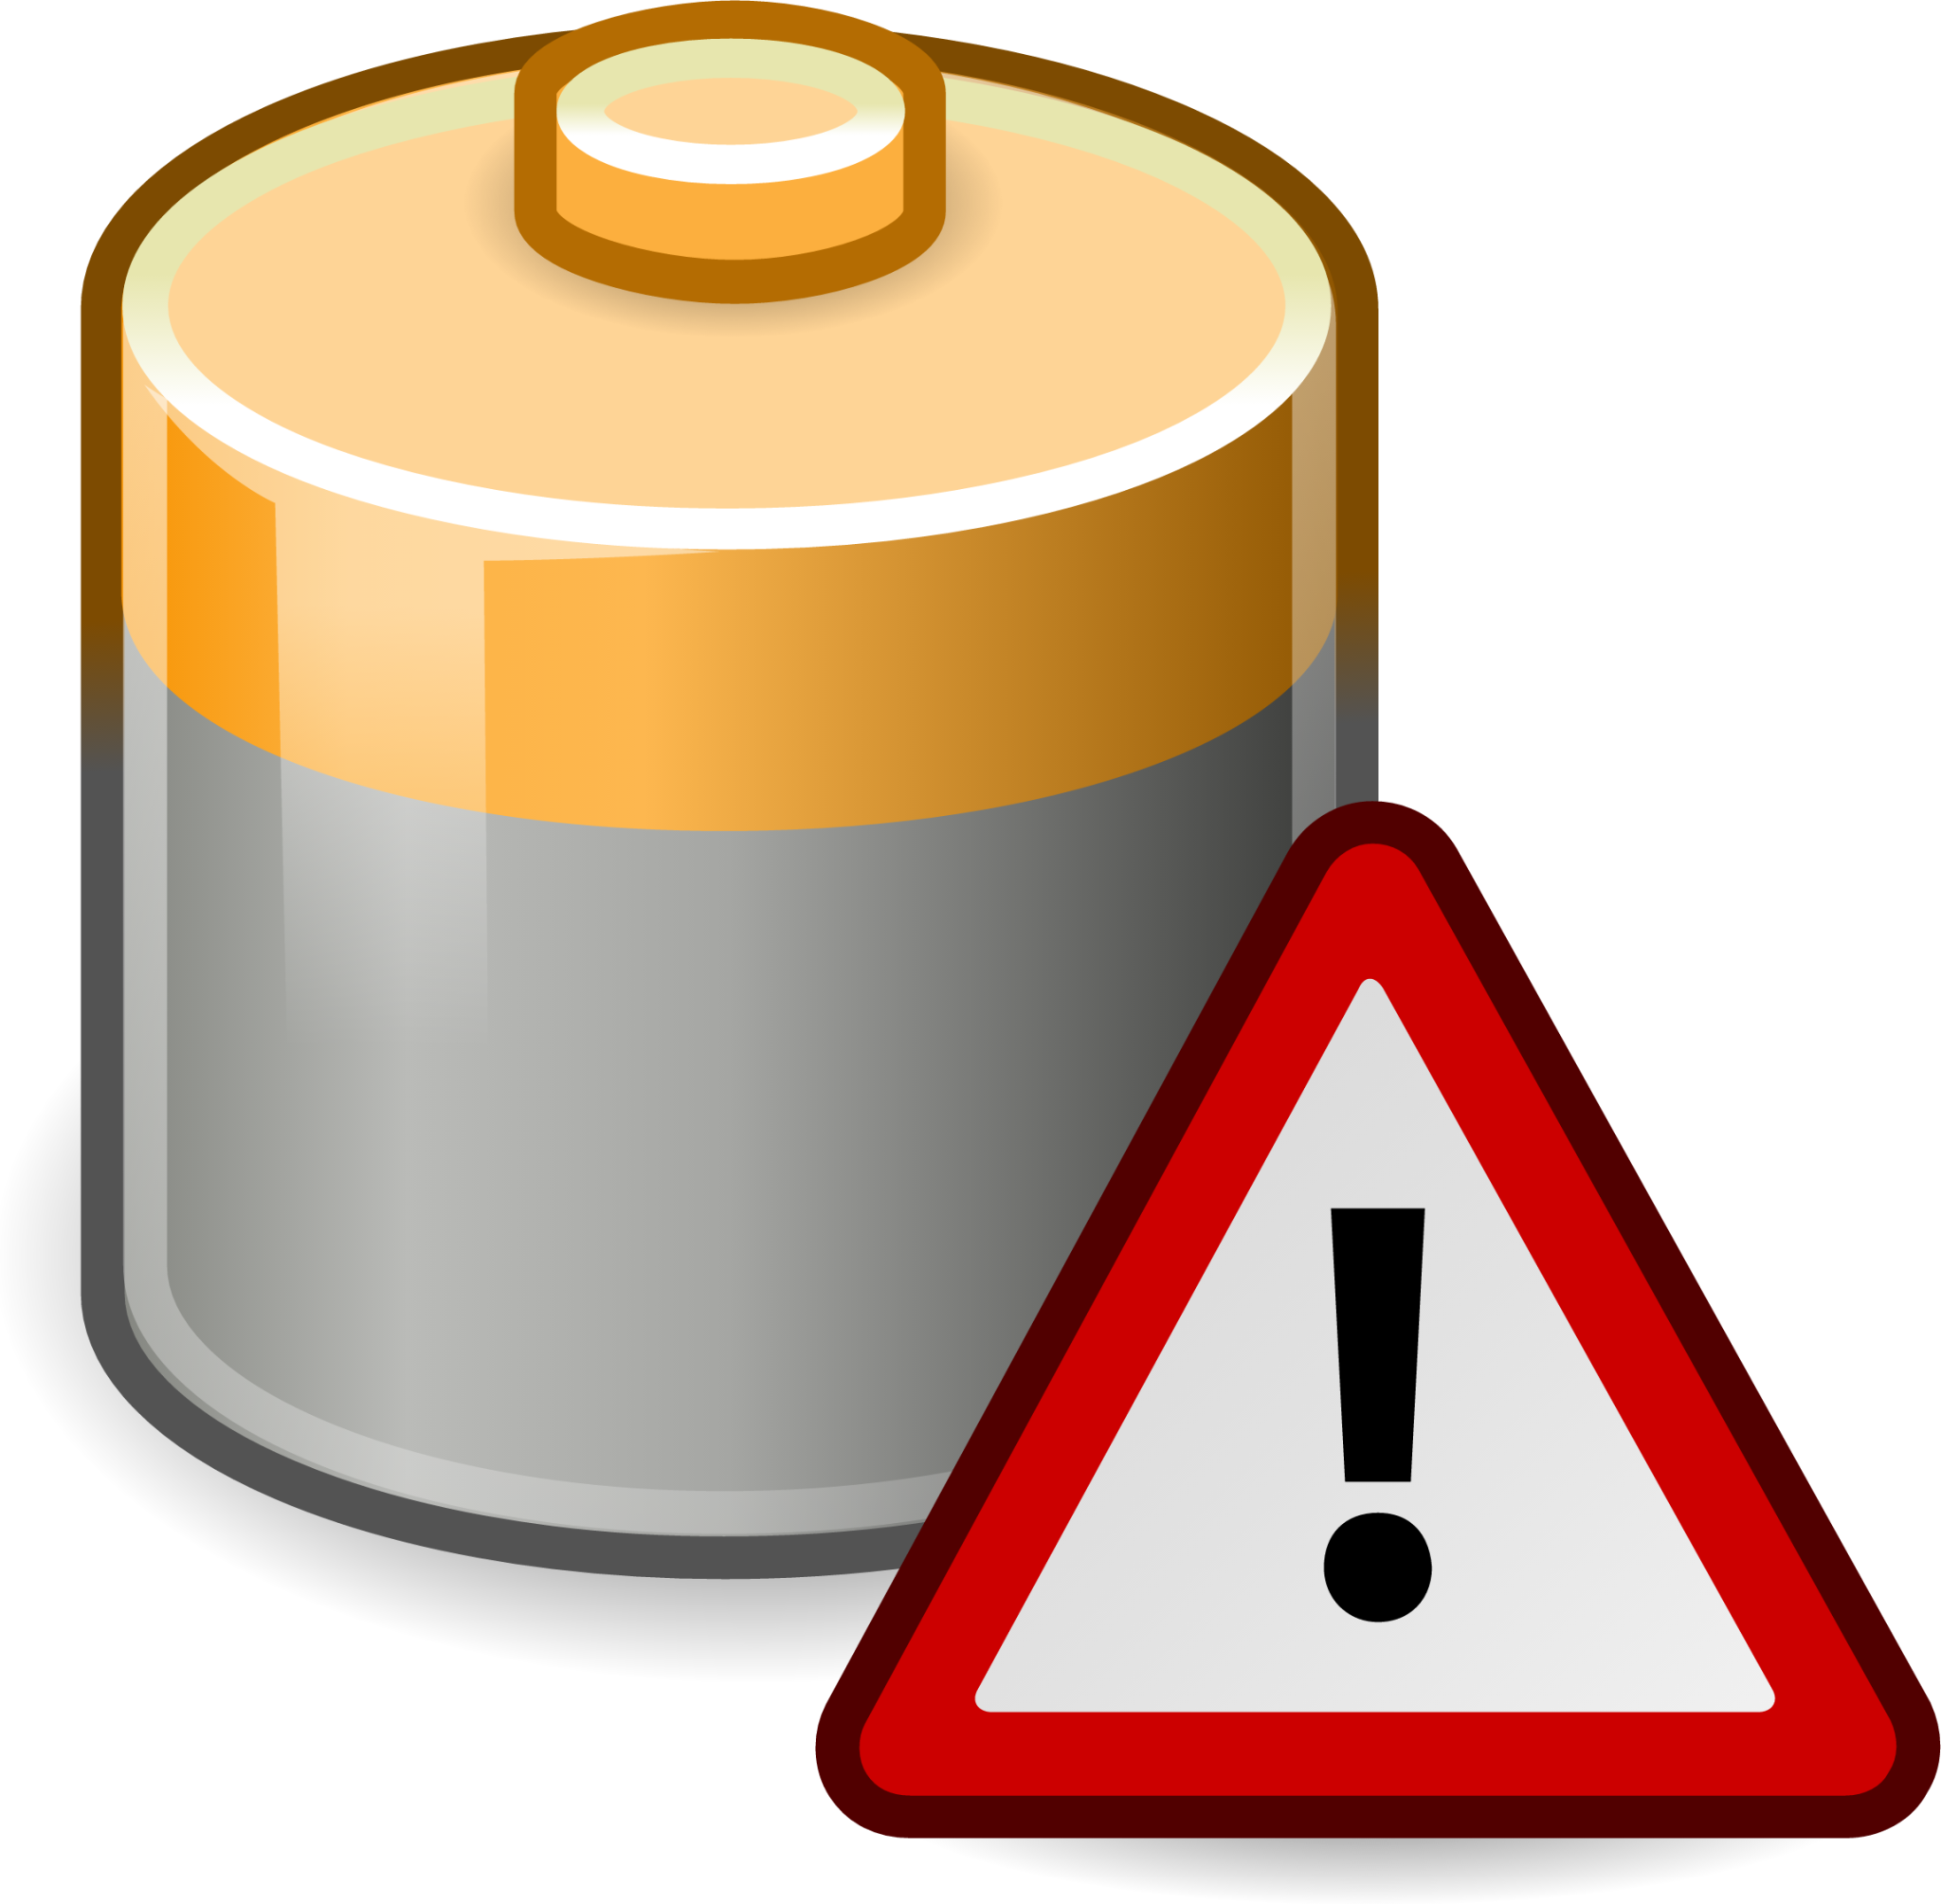 battery caution icon